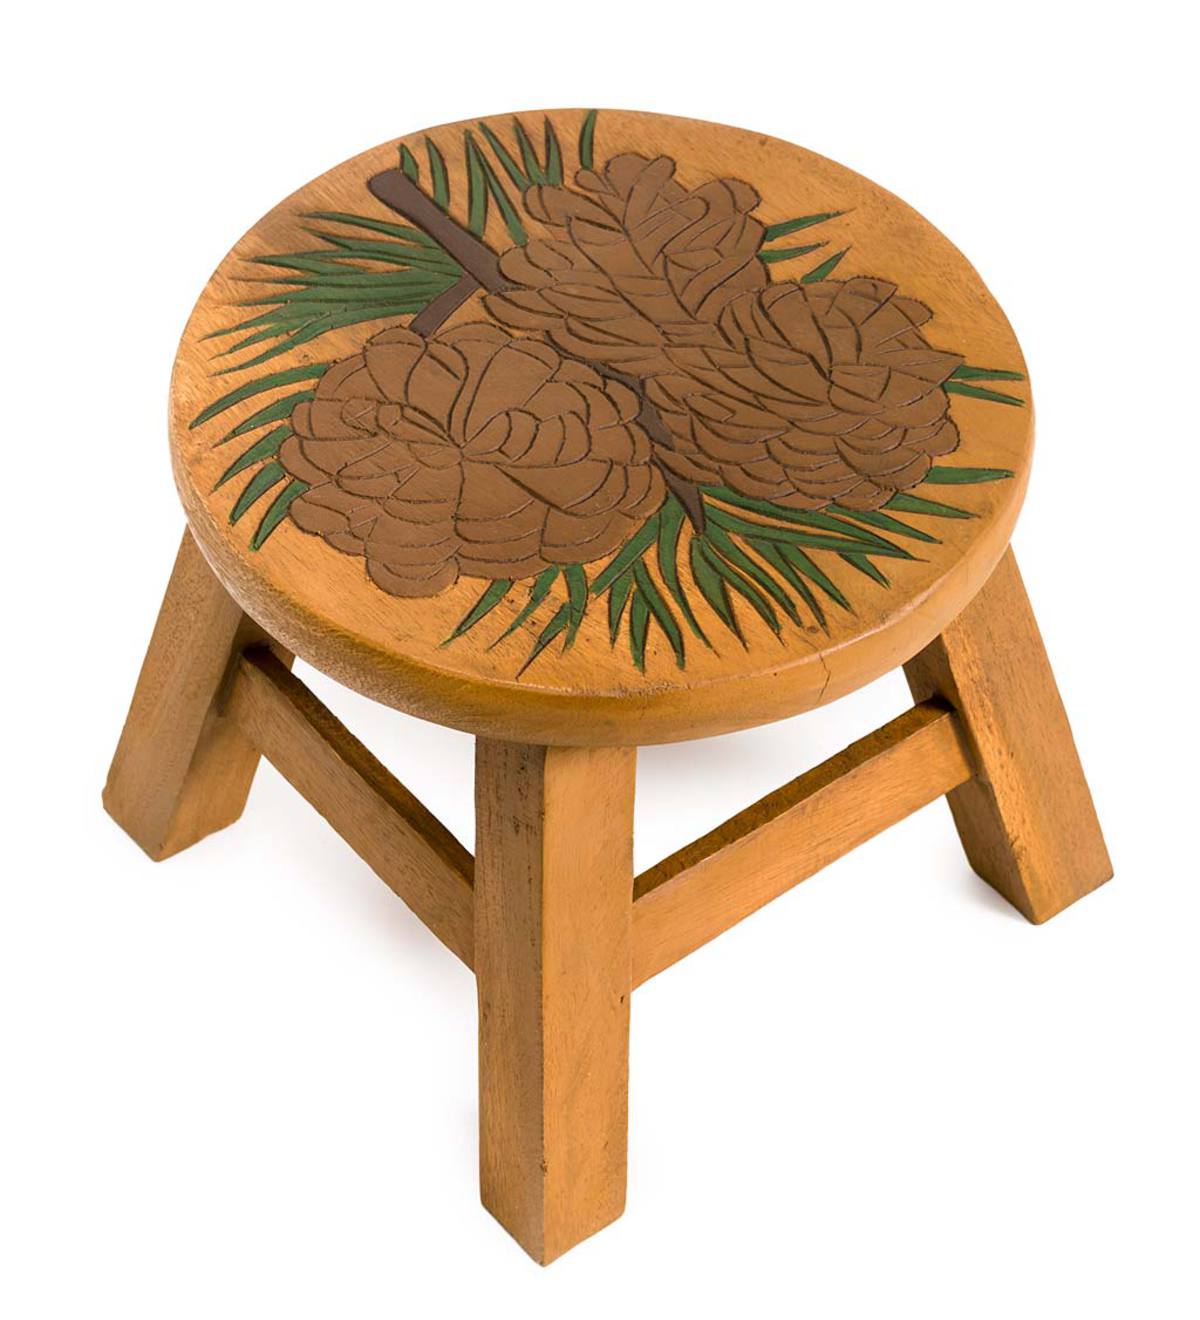 Hand-Carved Wood Pine Cone Footstool